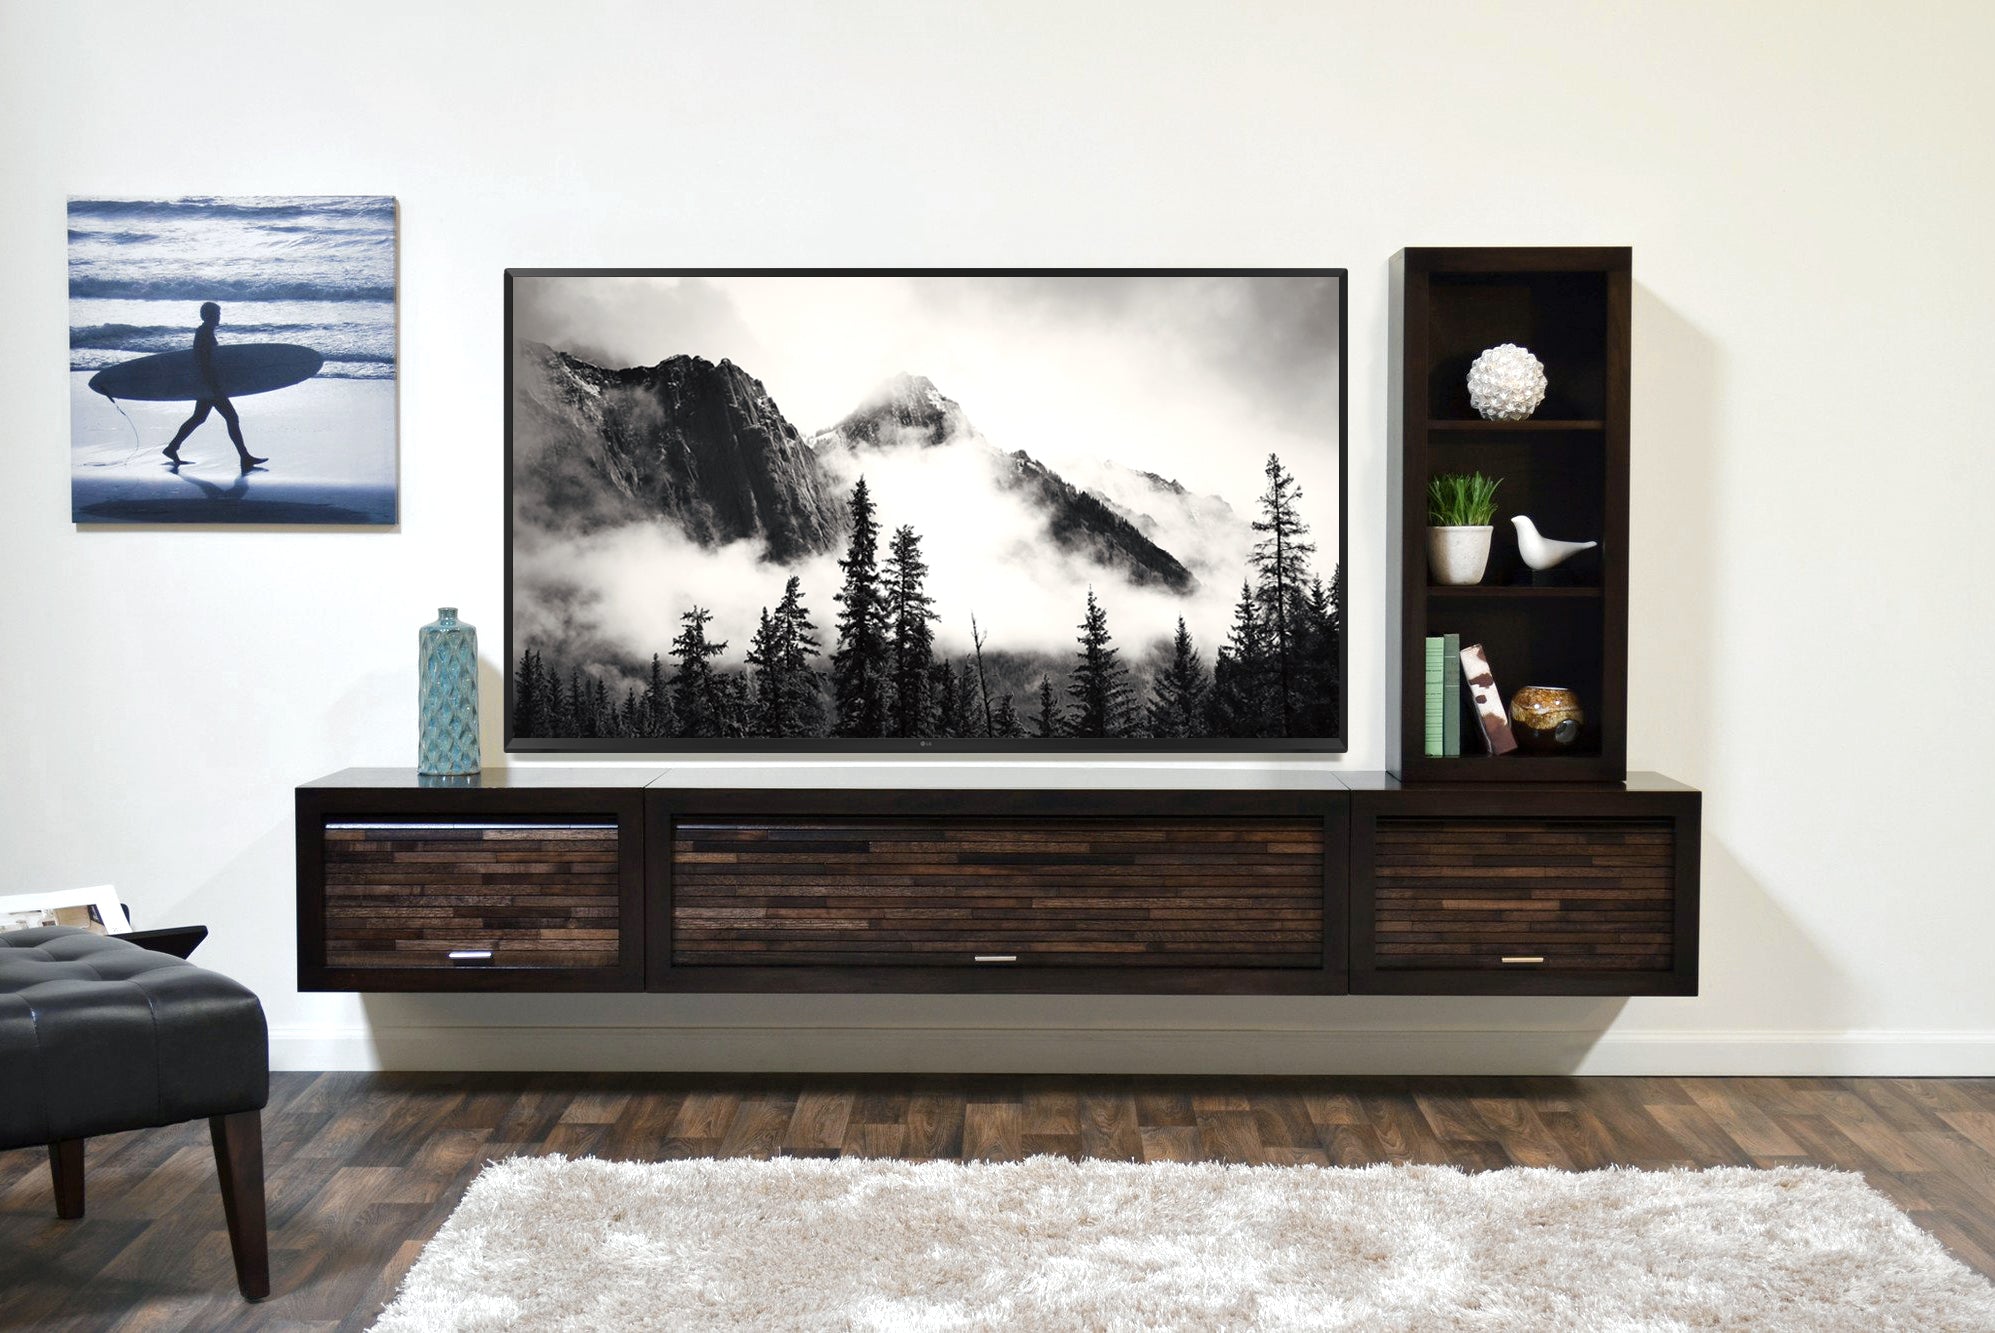 Floating TV Stand - Woodwaves - Floating Entertainment Center - ECO GEO Collection - Espresso